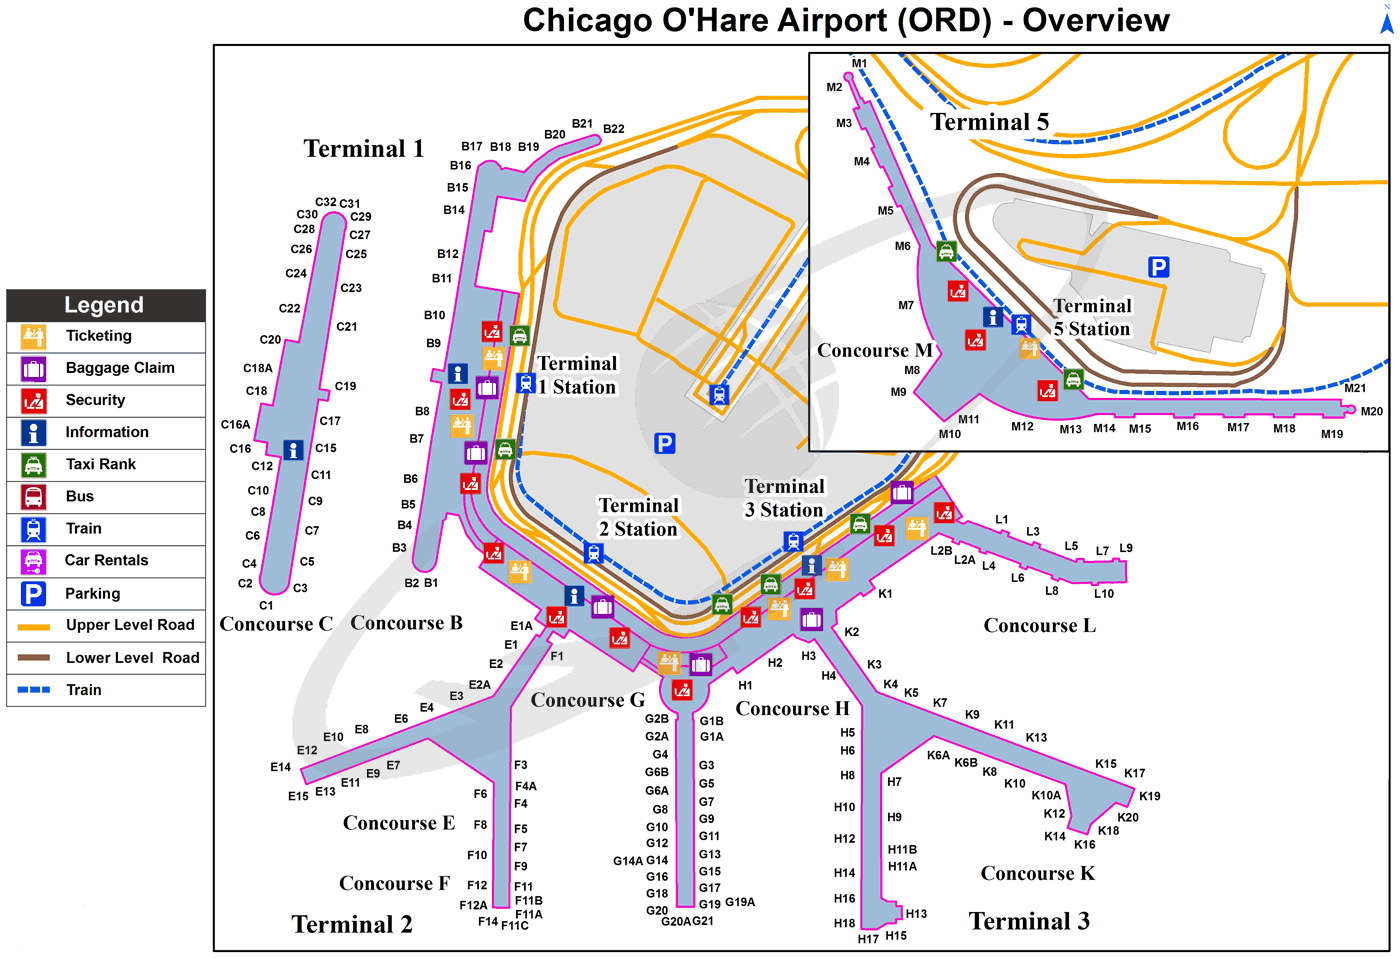 ORD_overview_map